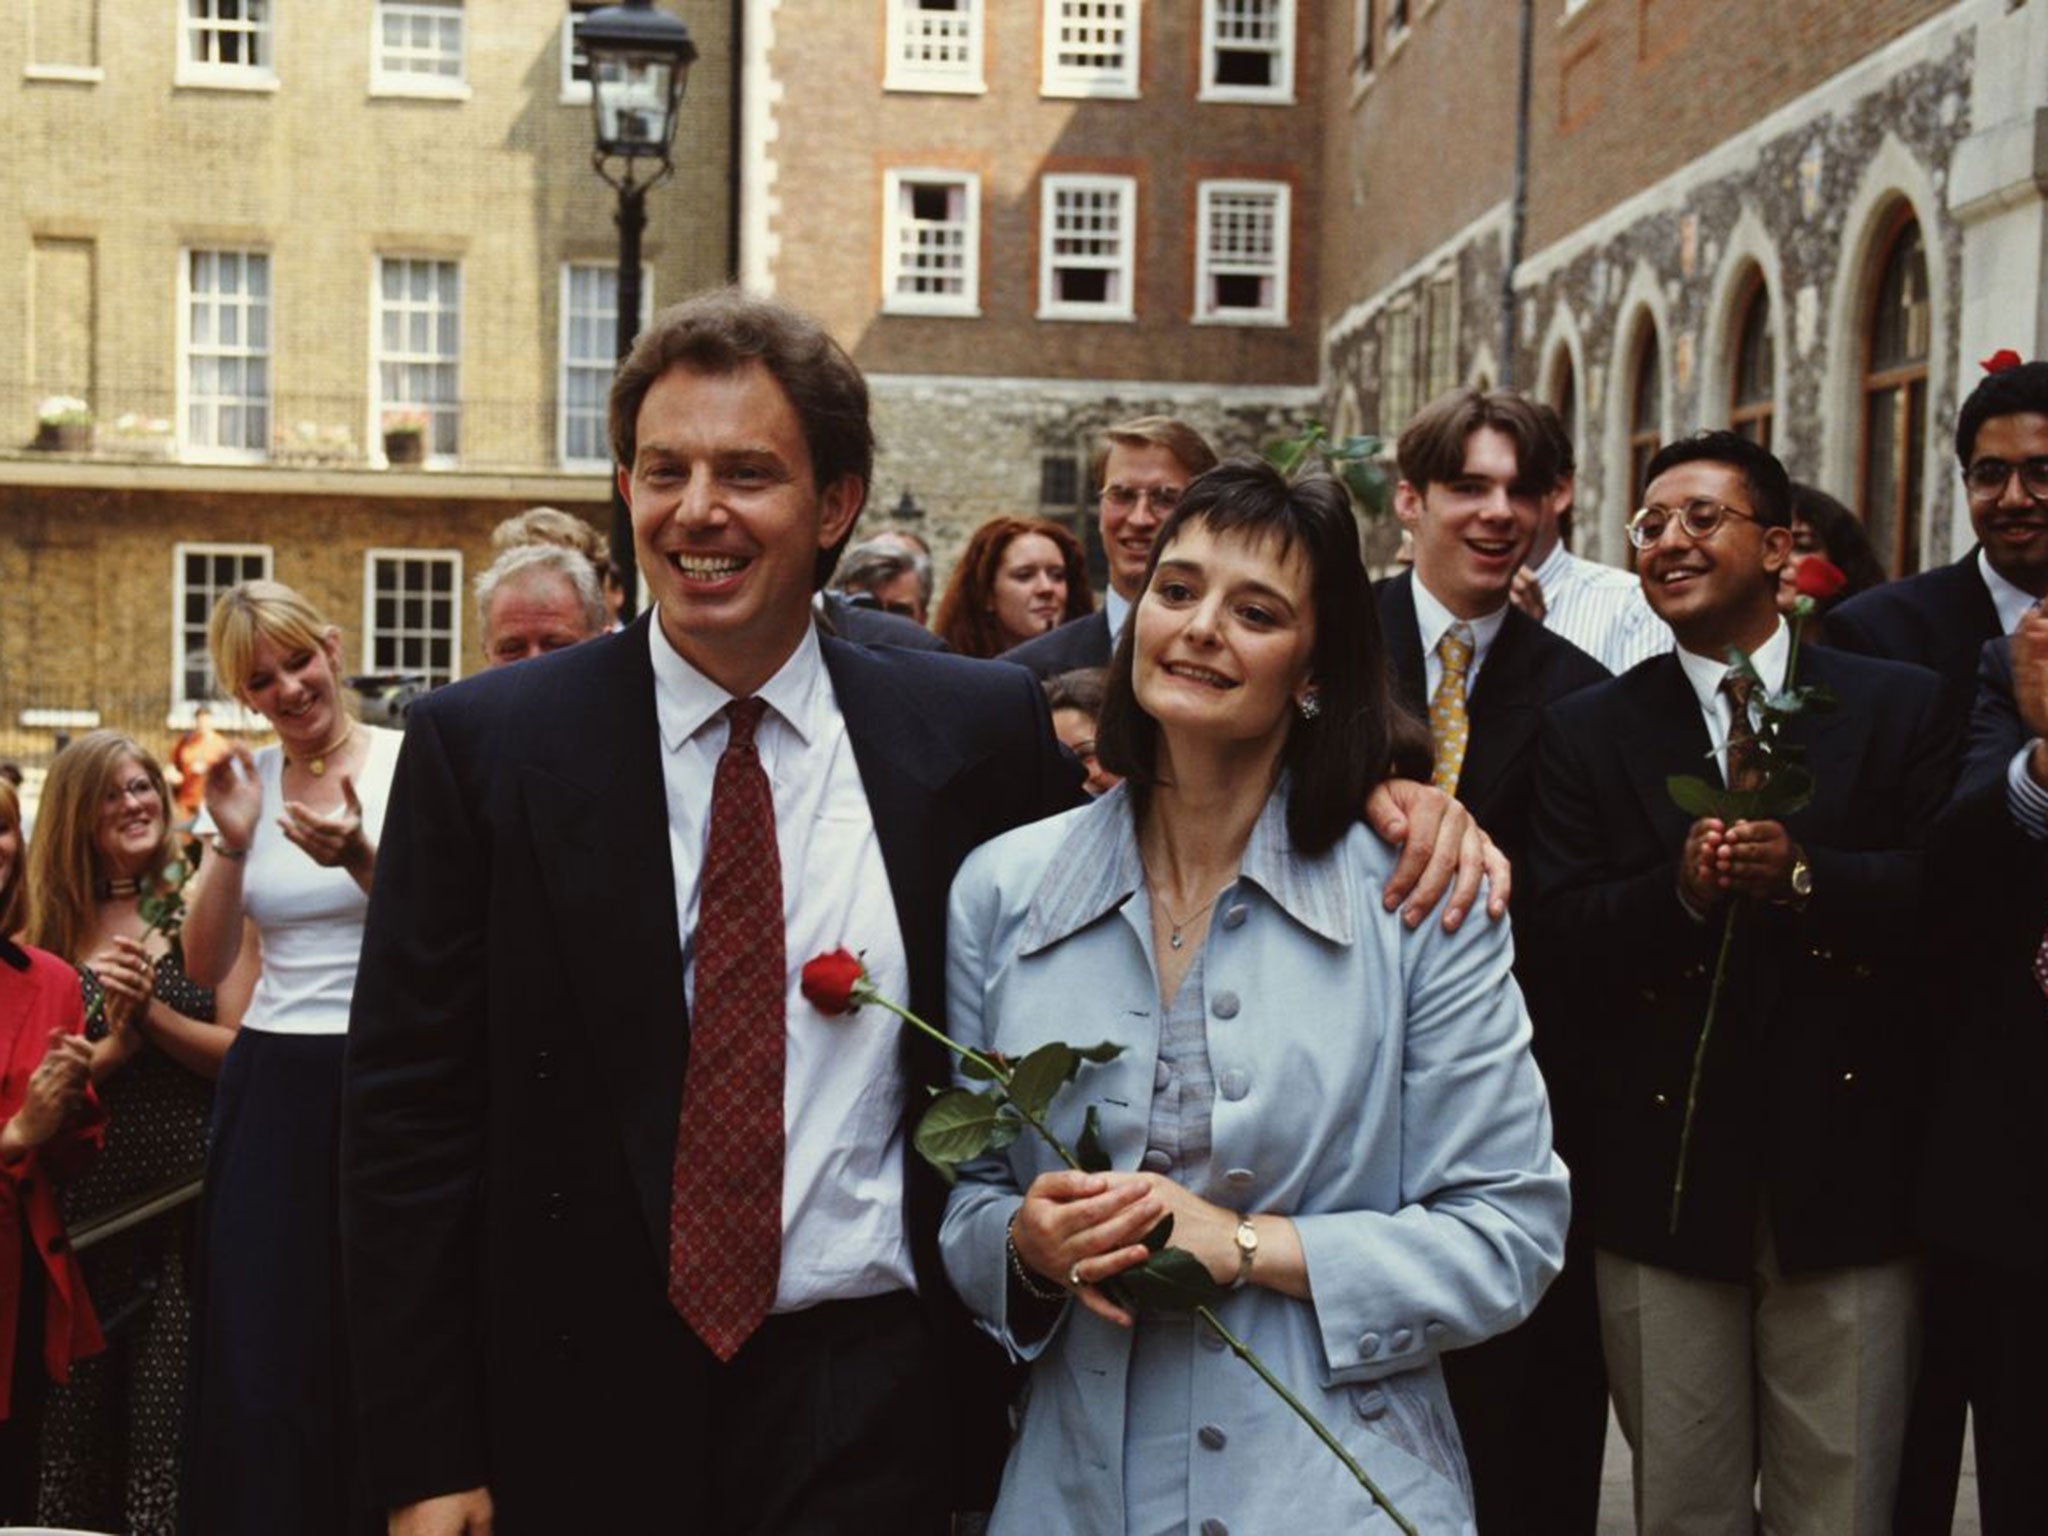 On entering Number 10 in 1997, Tony Blair was sceptical about the PFI